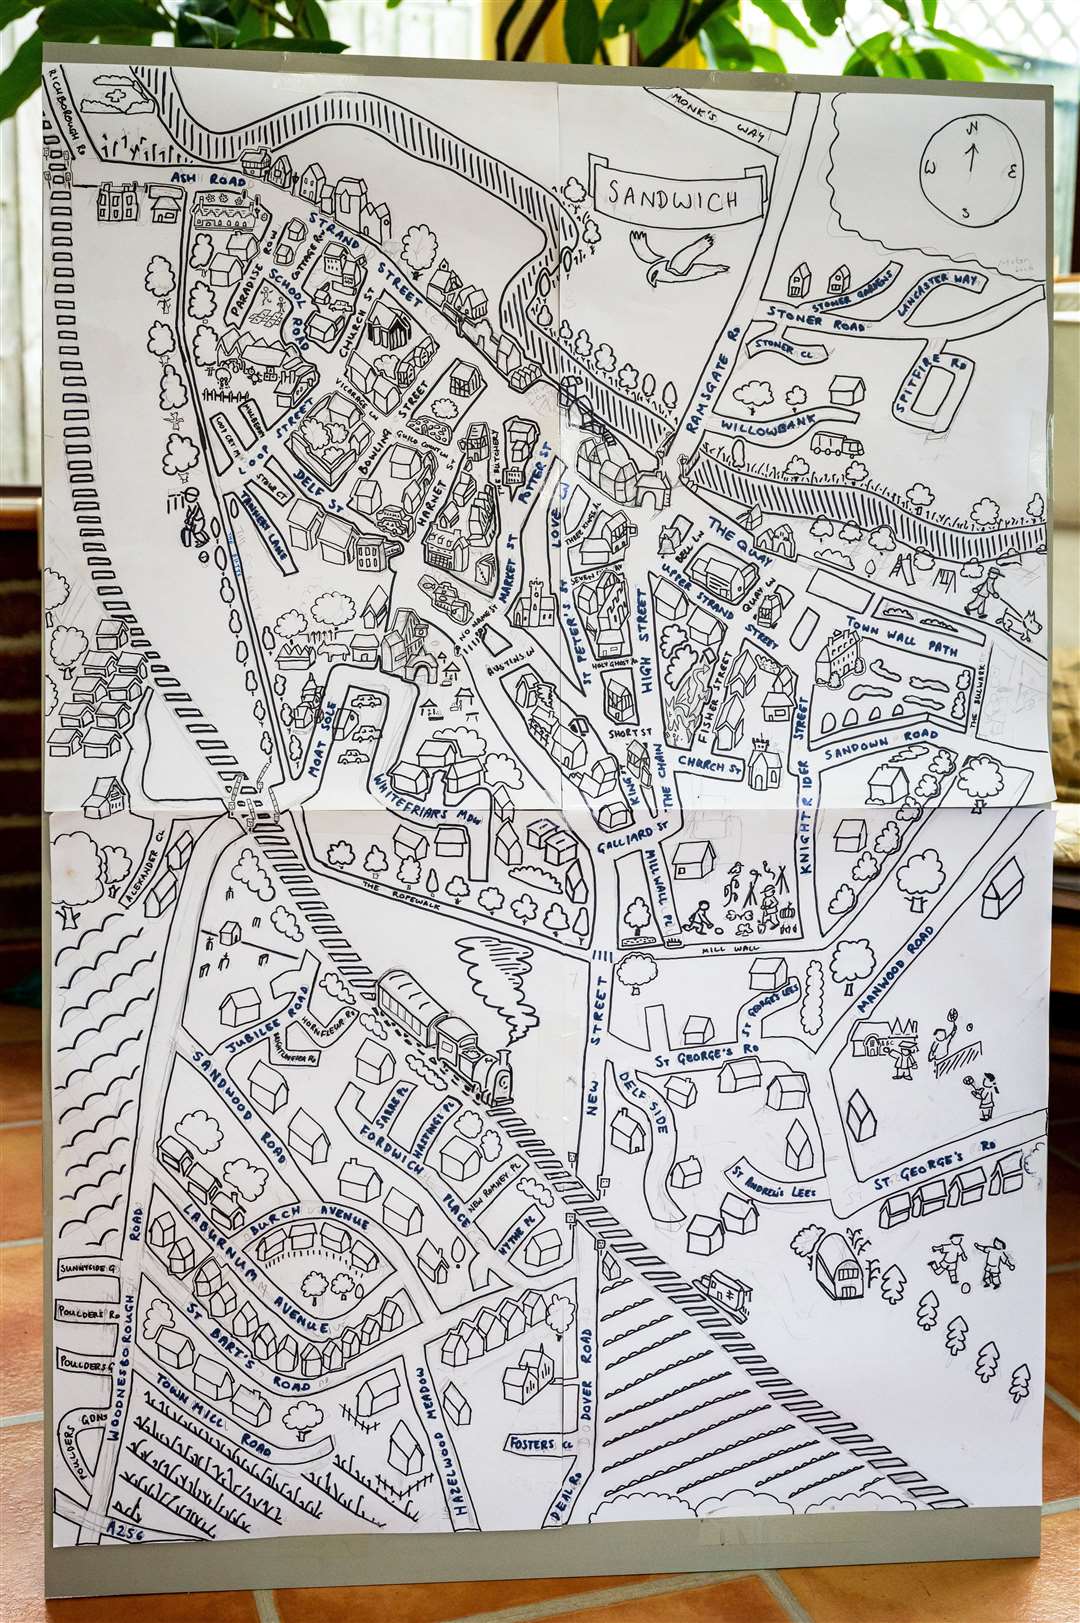 Daniel's hand-drawn map of Sandwich in its initial stages